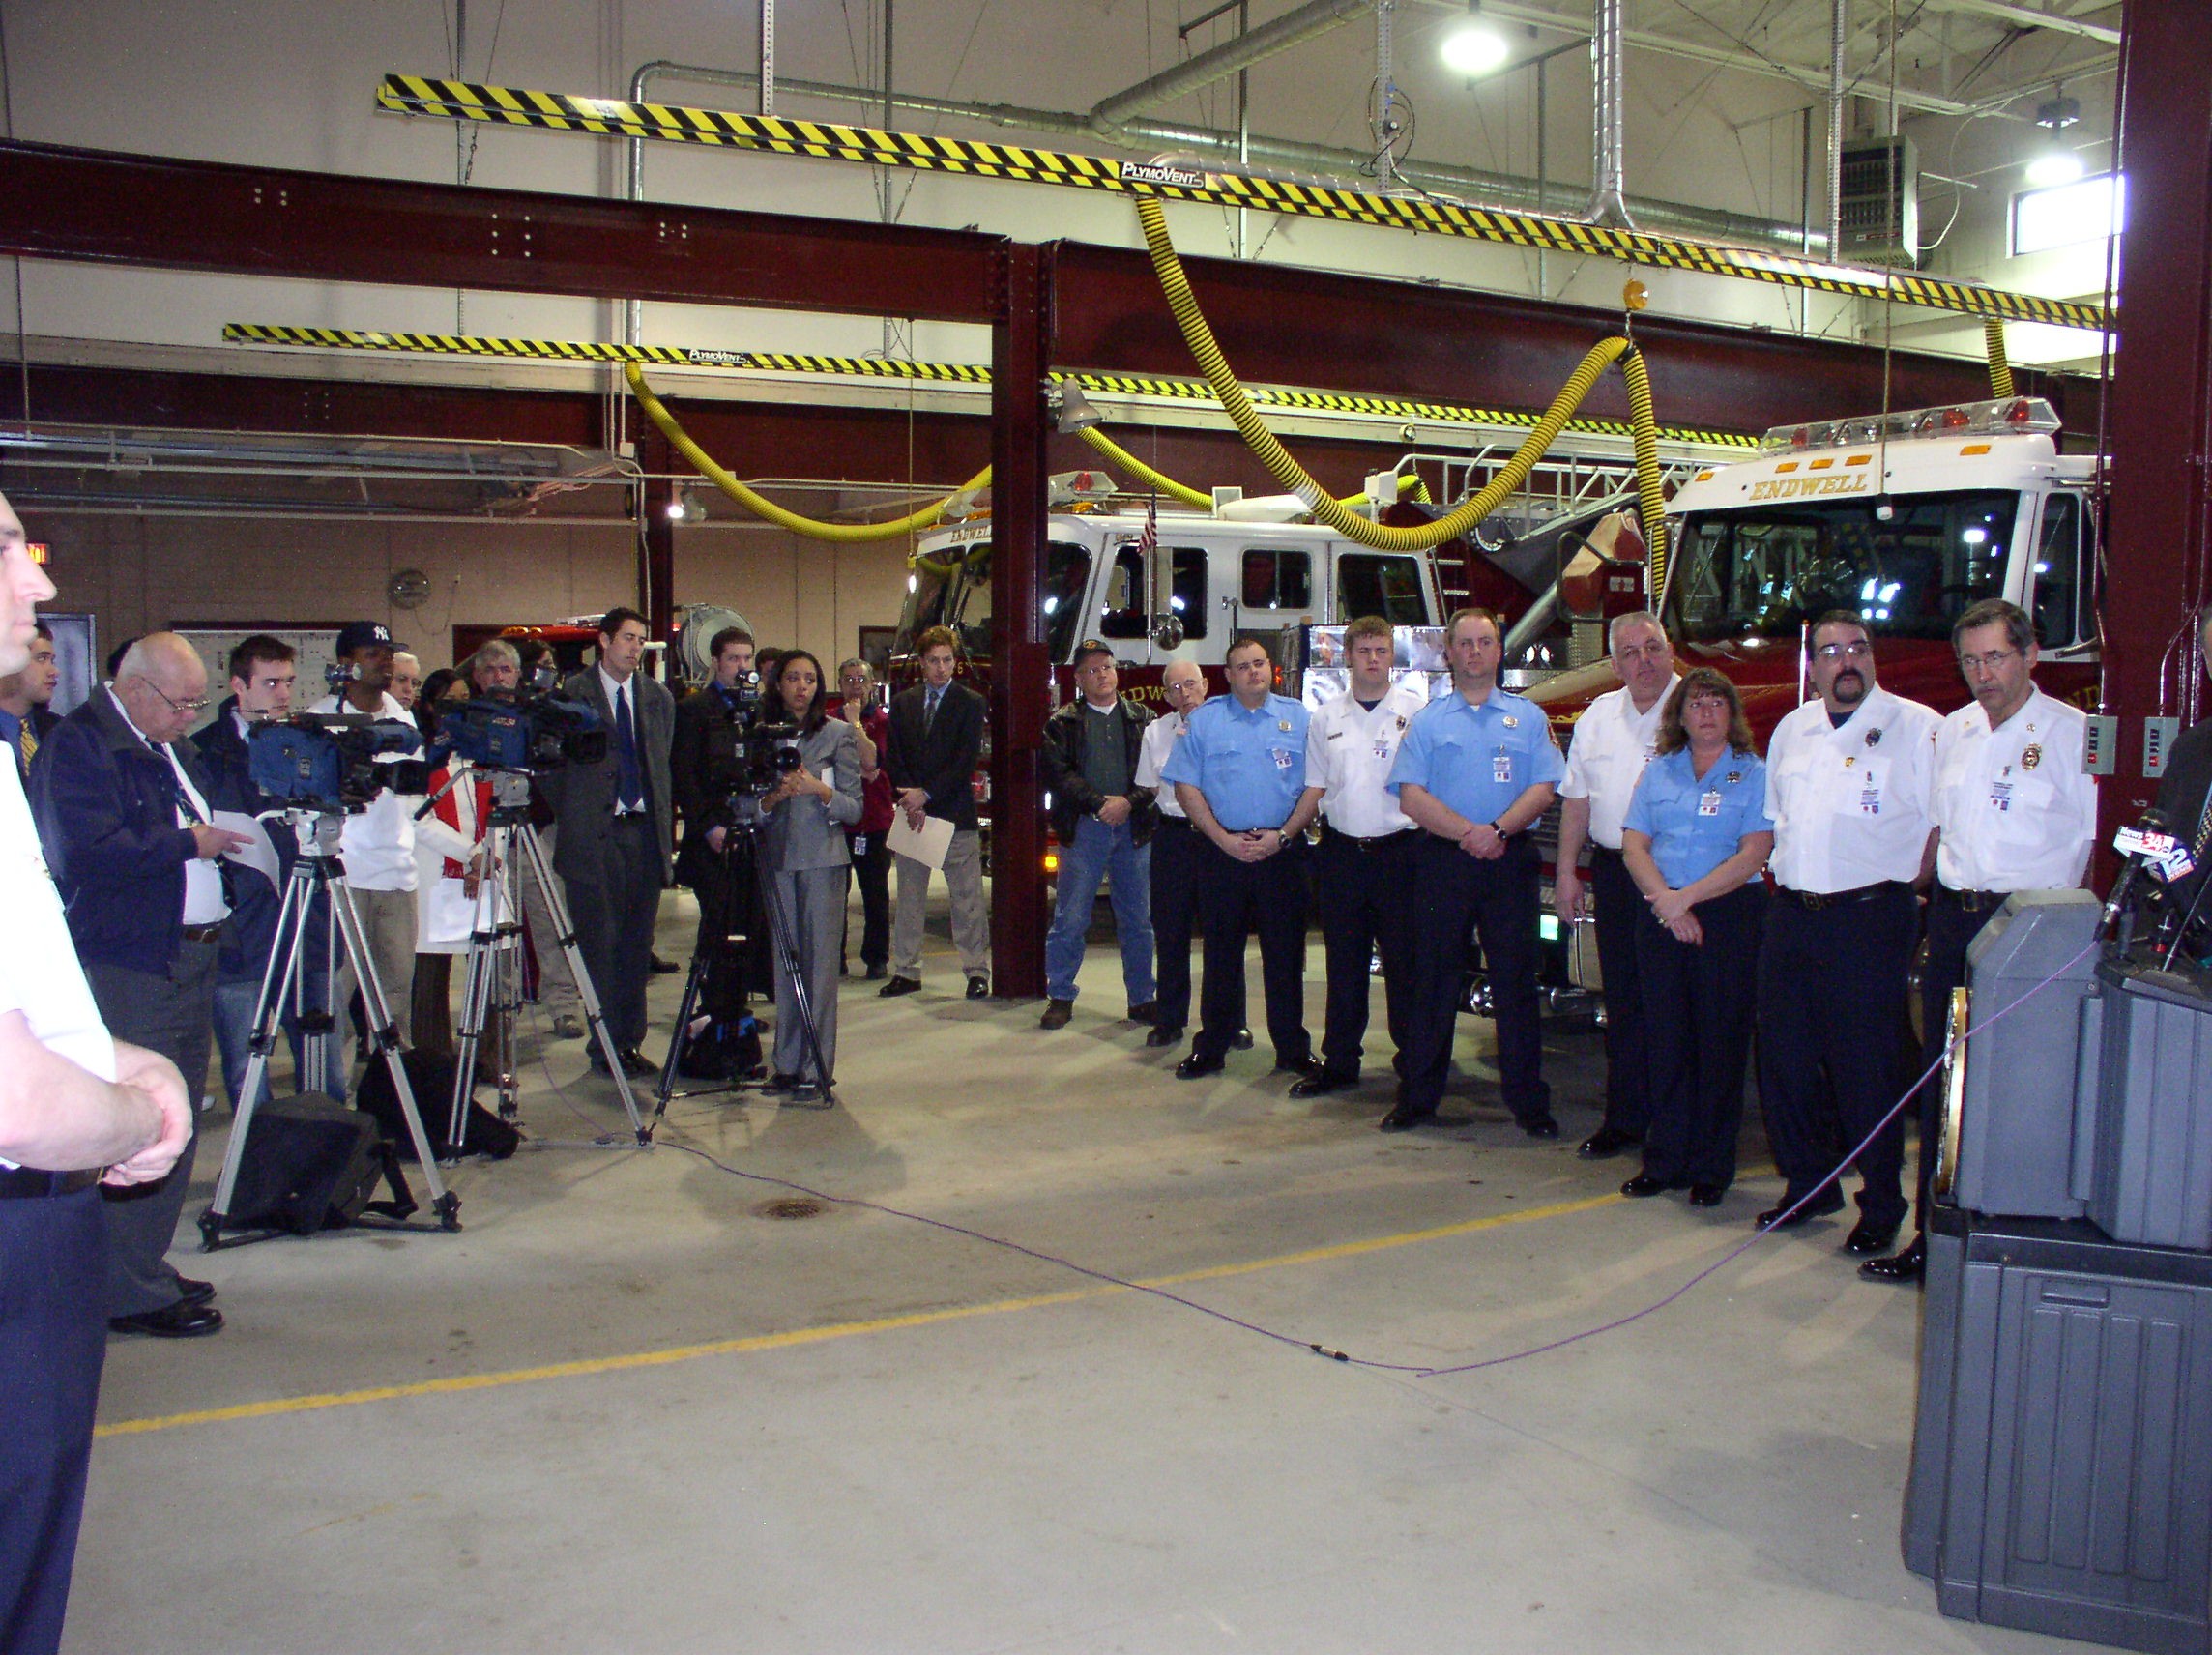 03-23-05  Other - Media Event At Endwell Fire